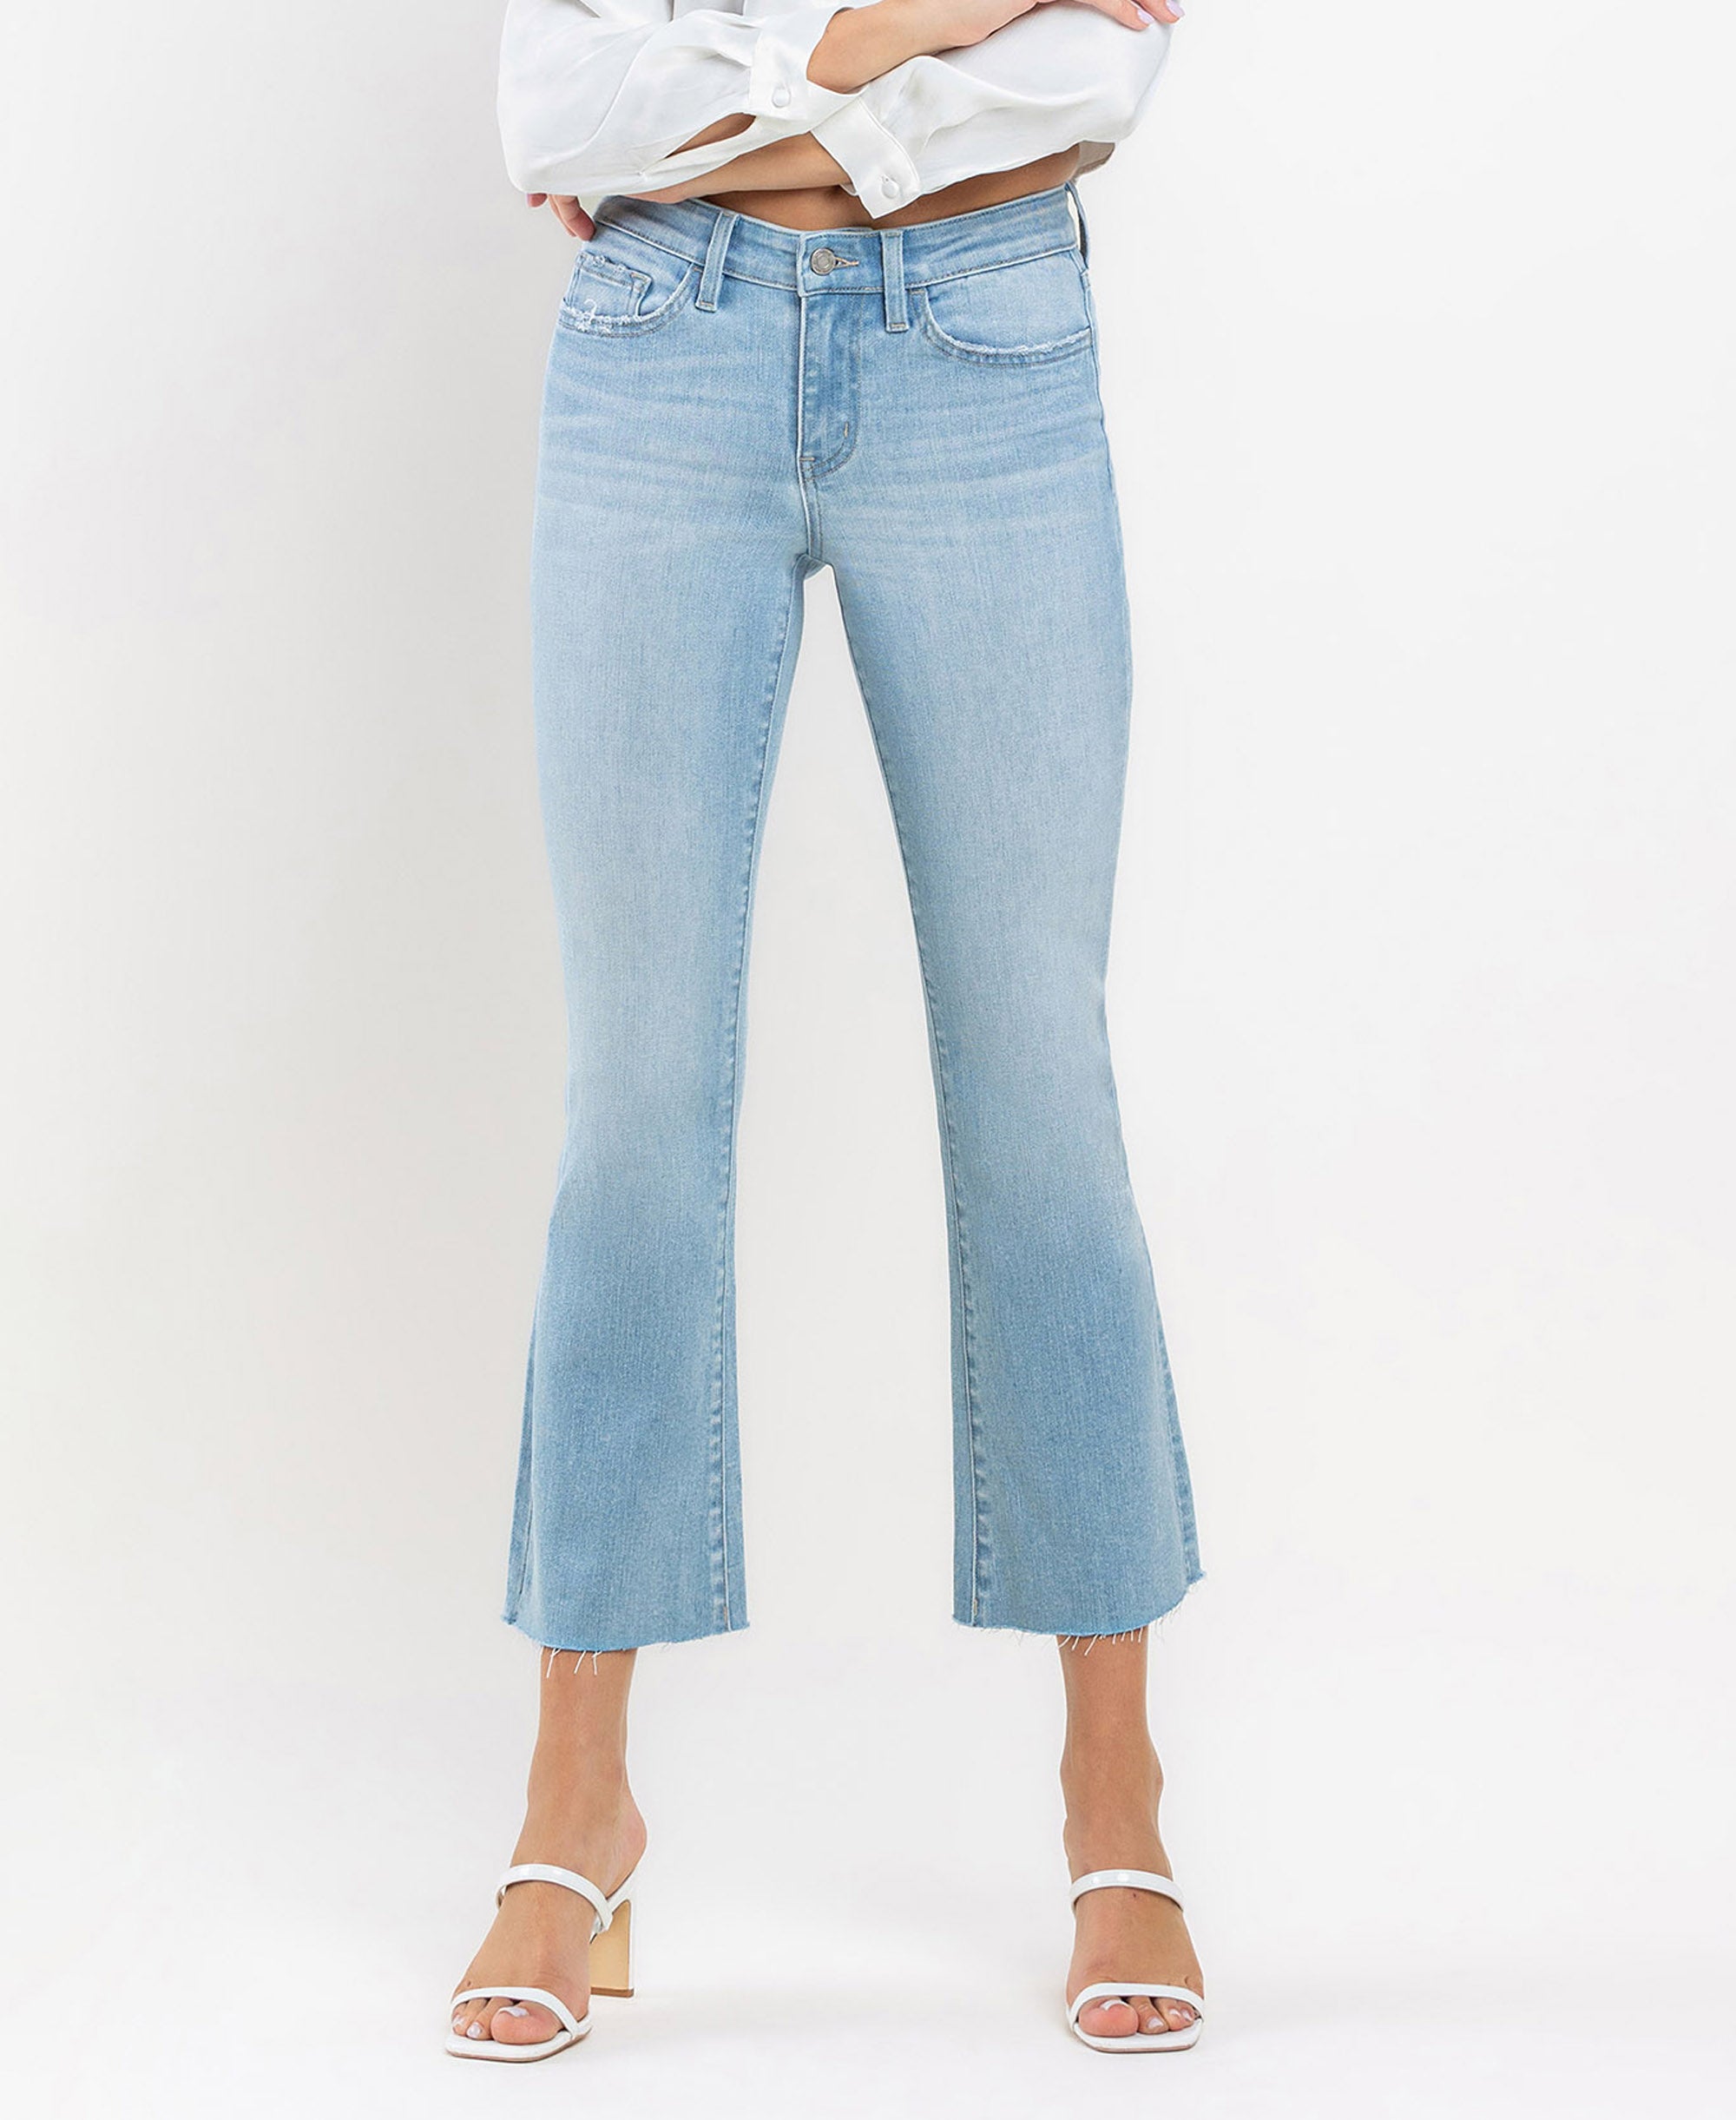 Midrise Ankle Bootcut Jean